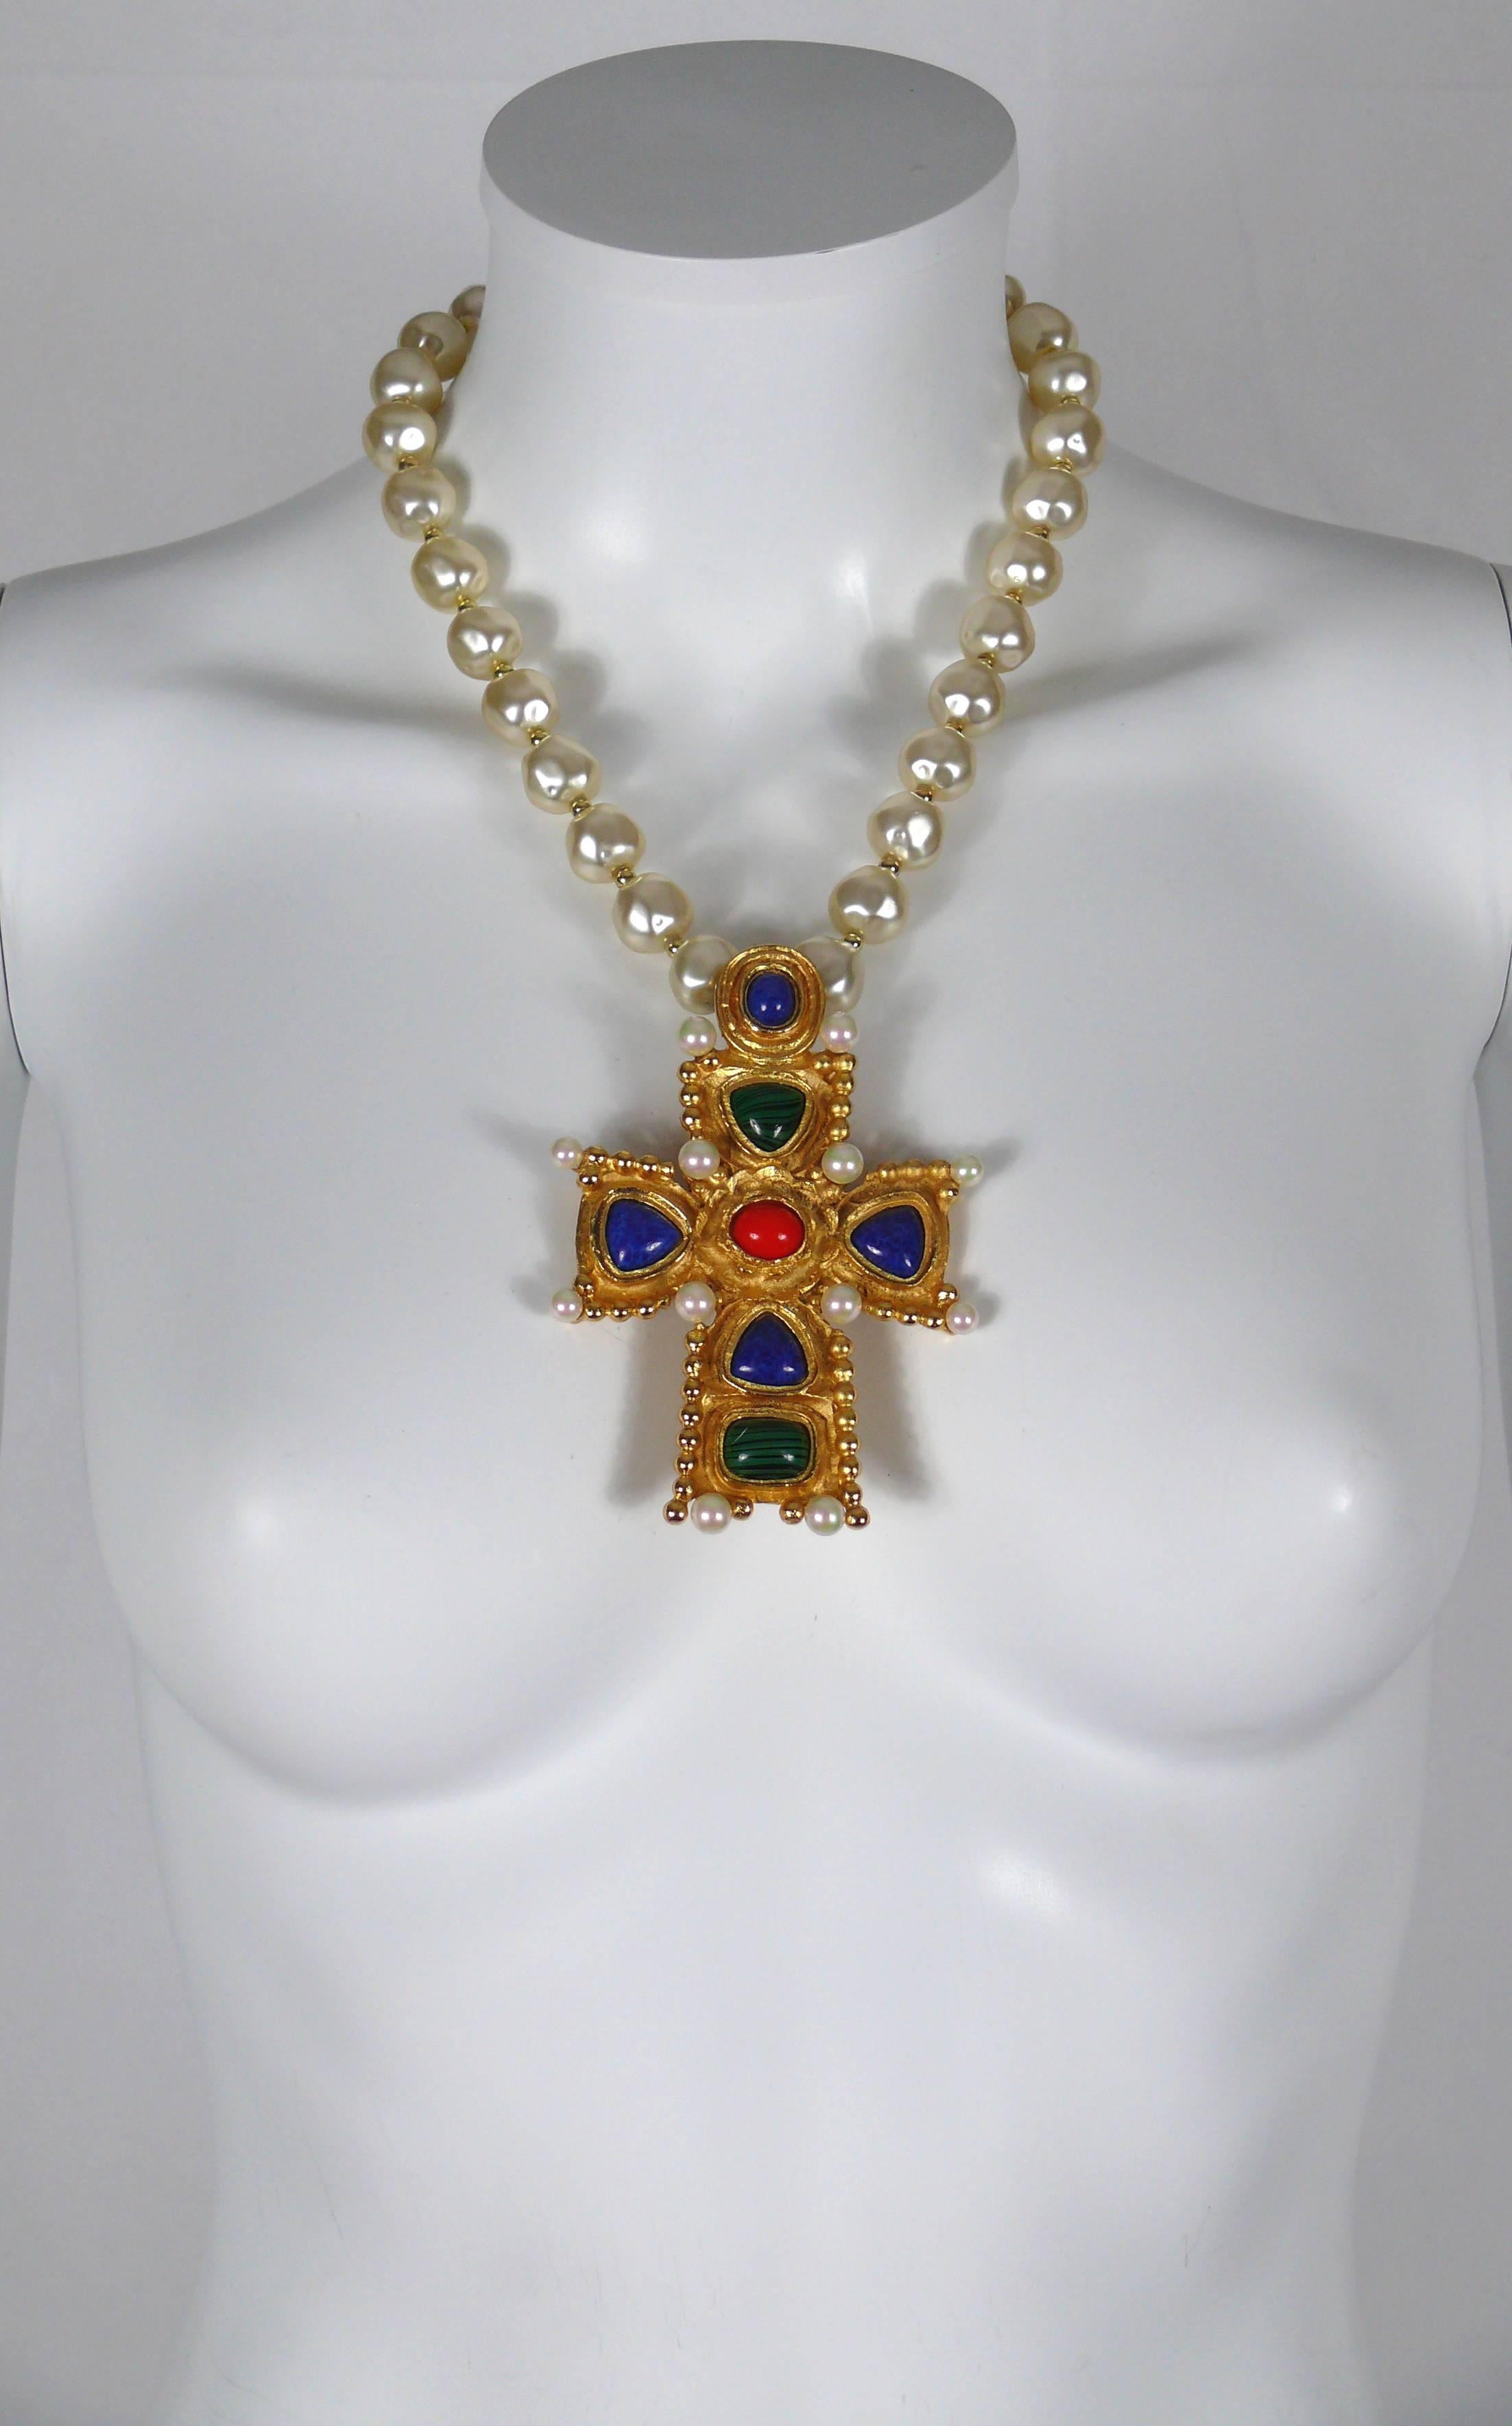 CHRISTIAN LACROIX vintage large faux pearl necklace featuring a massive gold toned textured Byzantine cross with multi colored faux stone embellishement.

Marked CHRISTIAN LACROIX CL Made in France.

Indicative measurements : total length